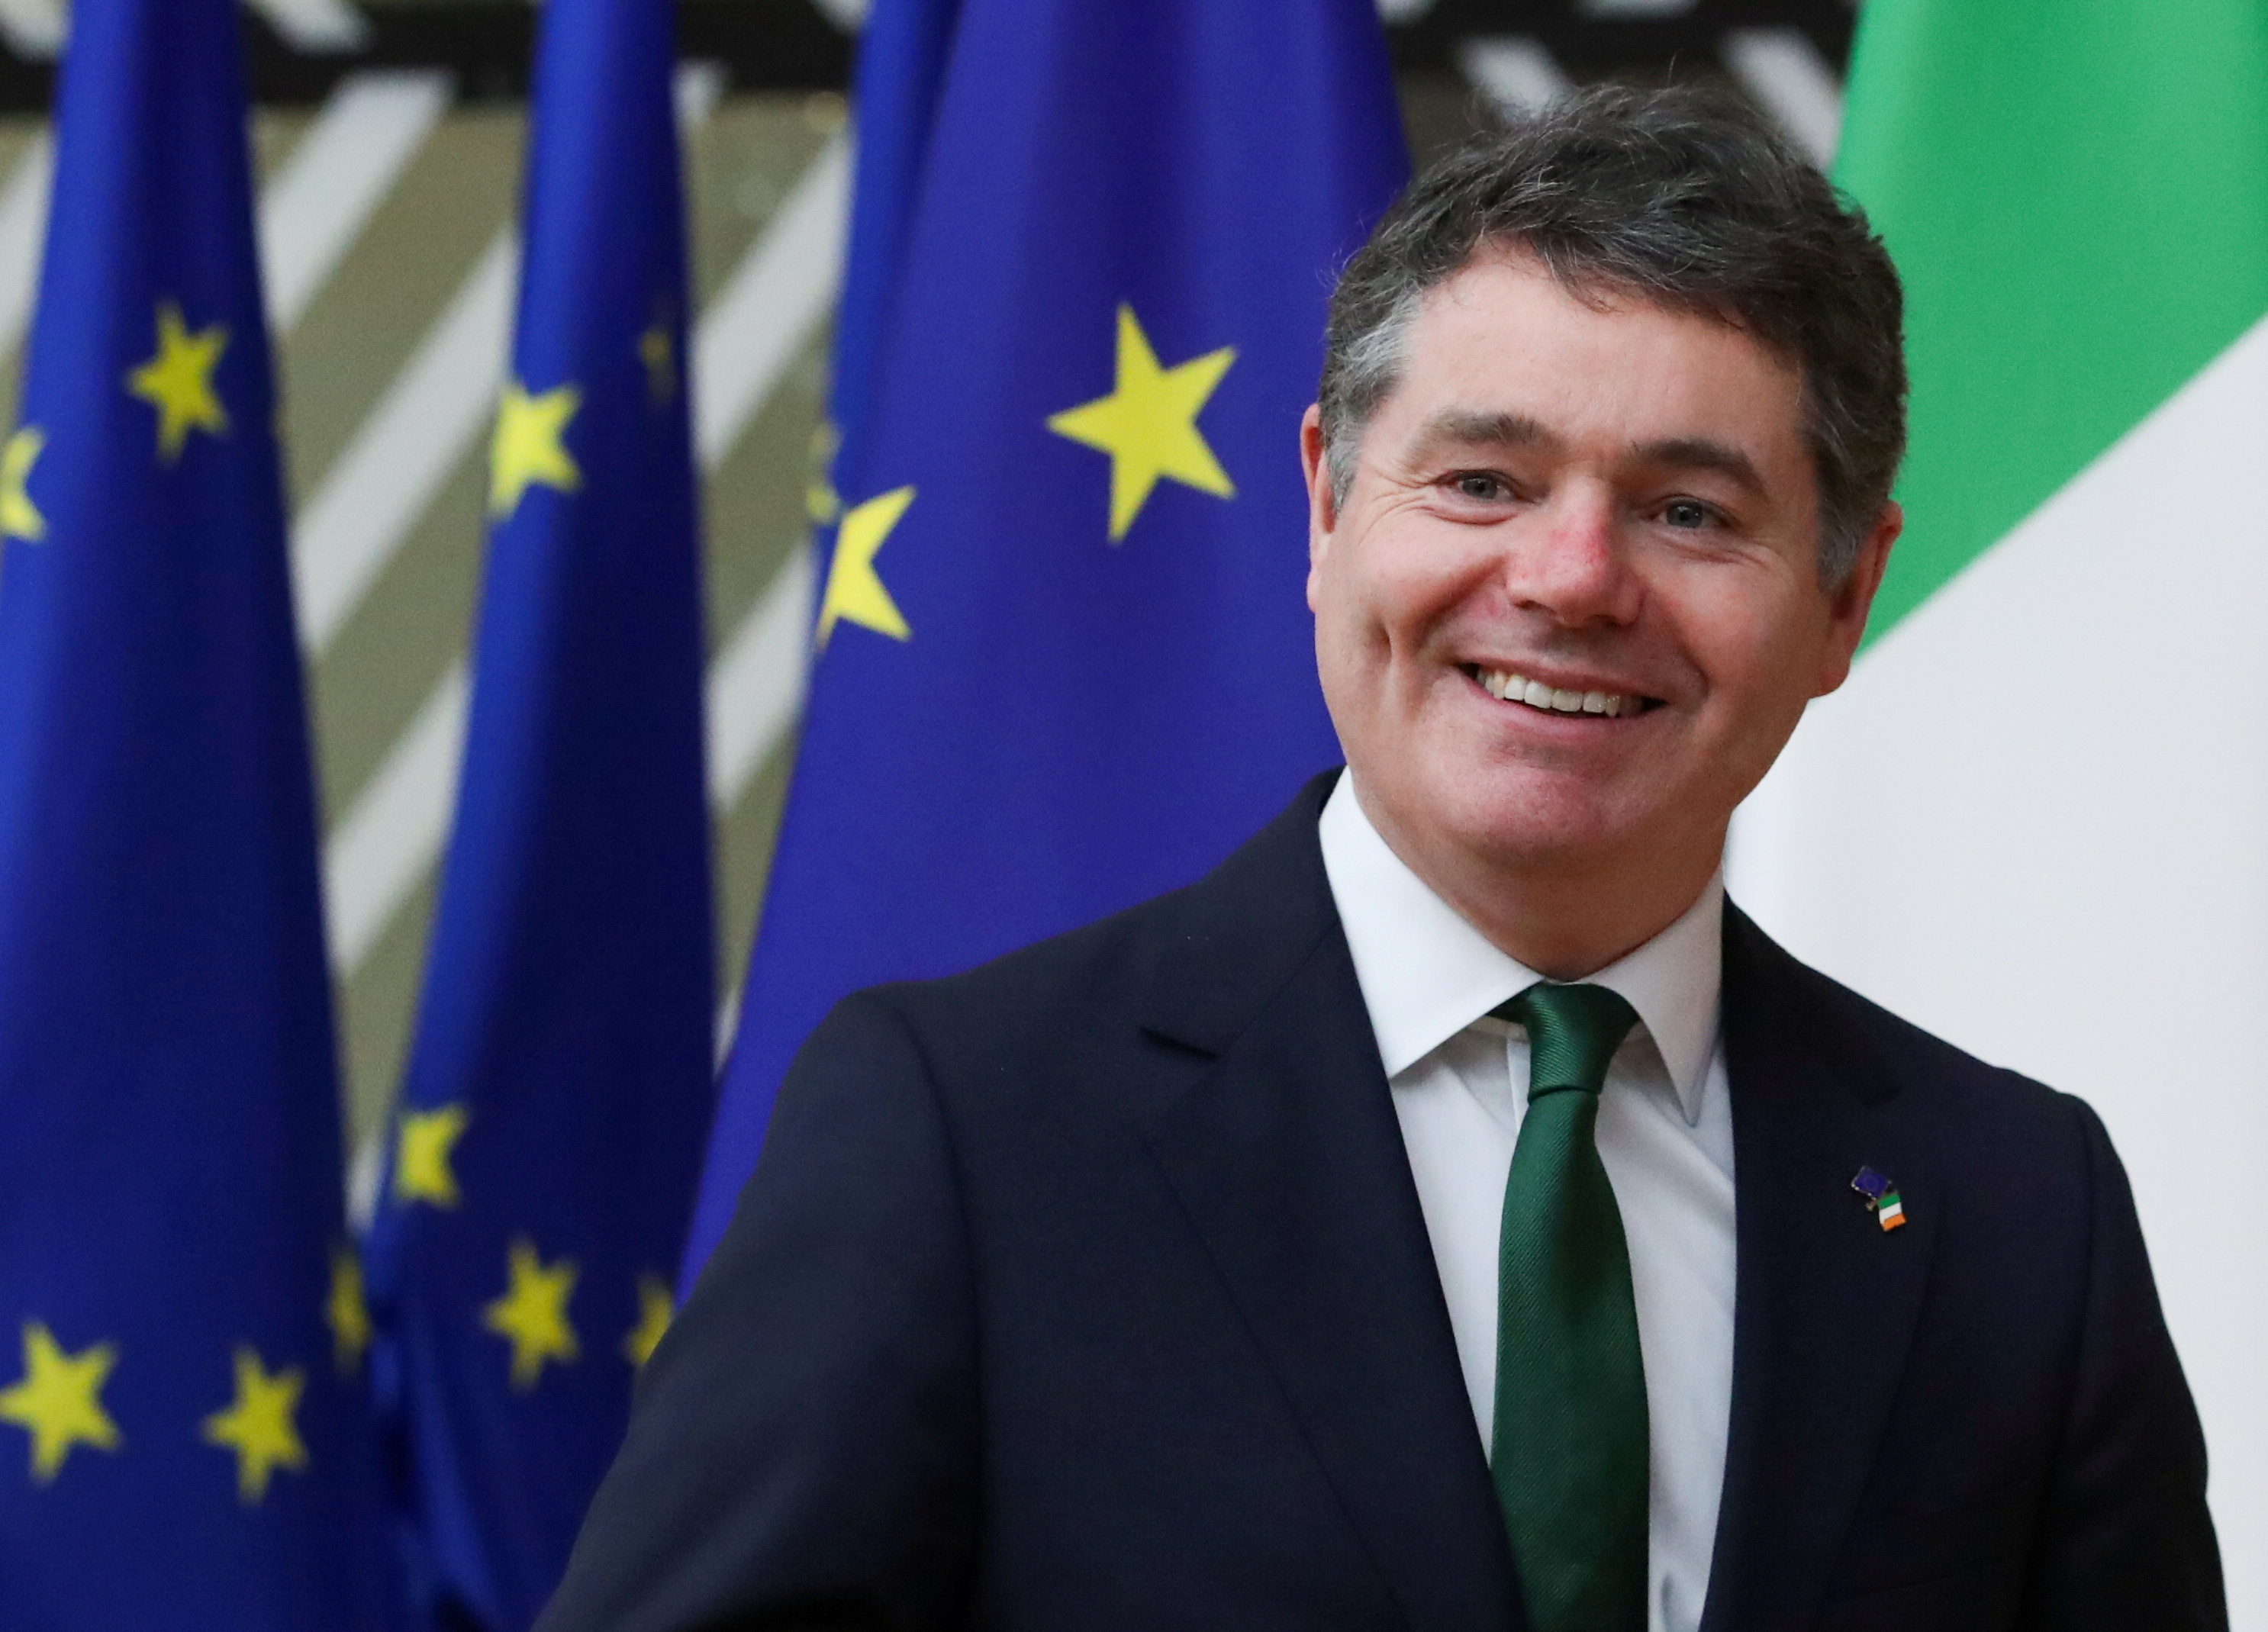 Irish Finance Minister Paschal Donohoe arrives at the EU council headquarters in Brussels